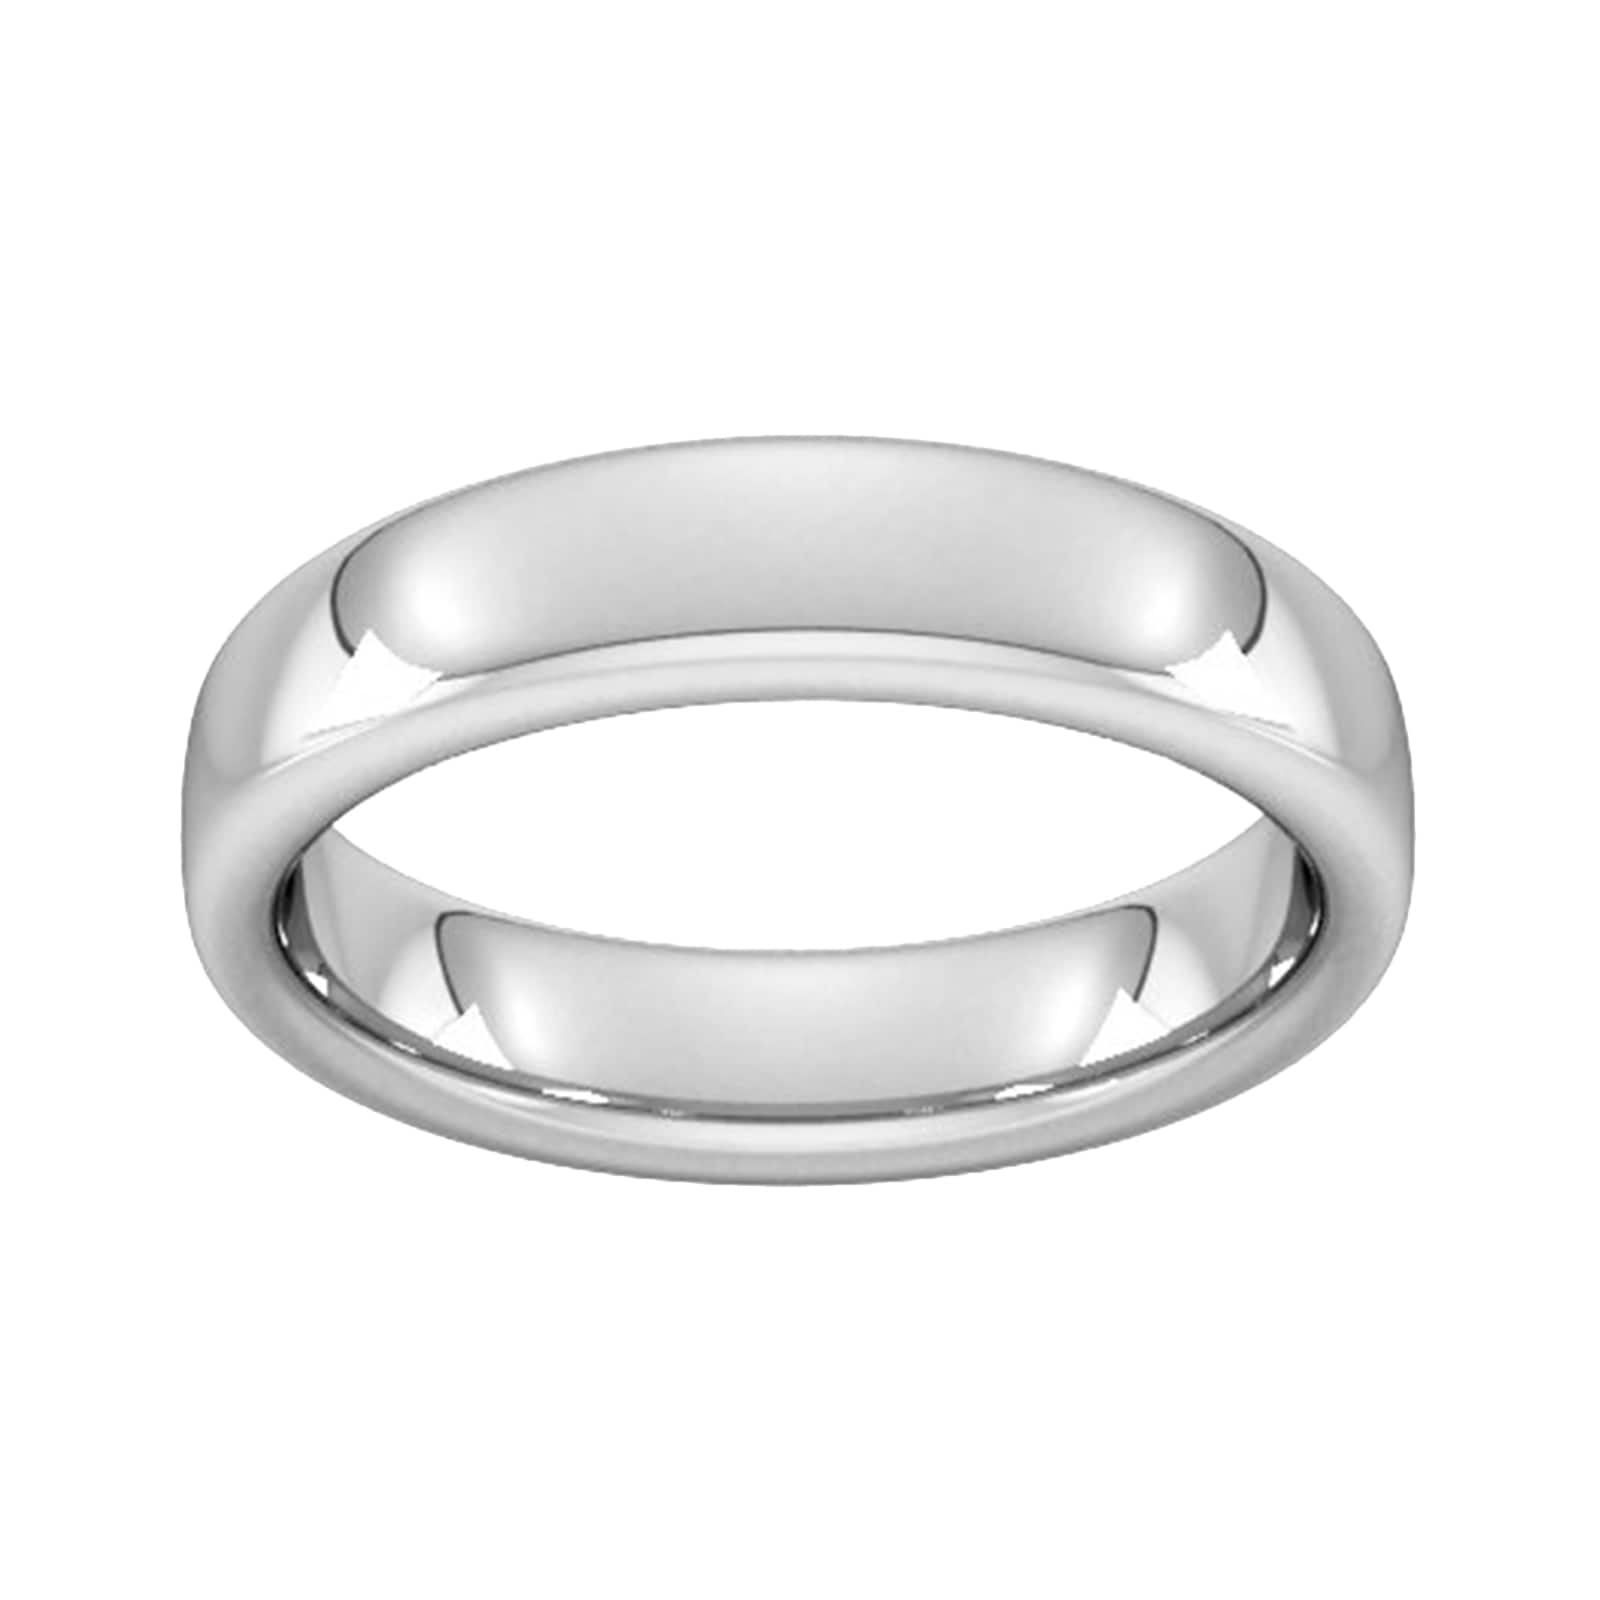 5mm Slight Court Extra Heavy Wedding Ring In 9 Carat White Gold - Ring Size M